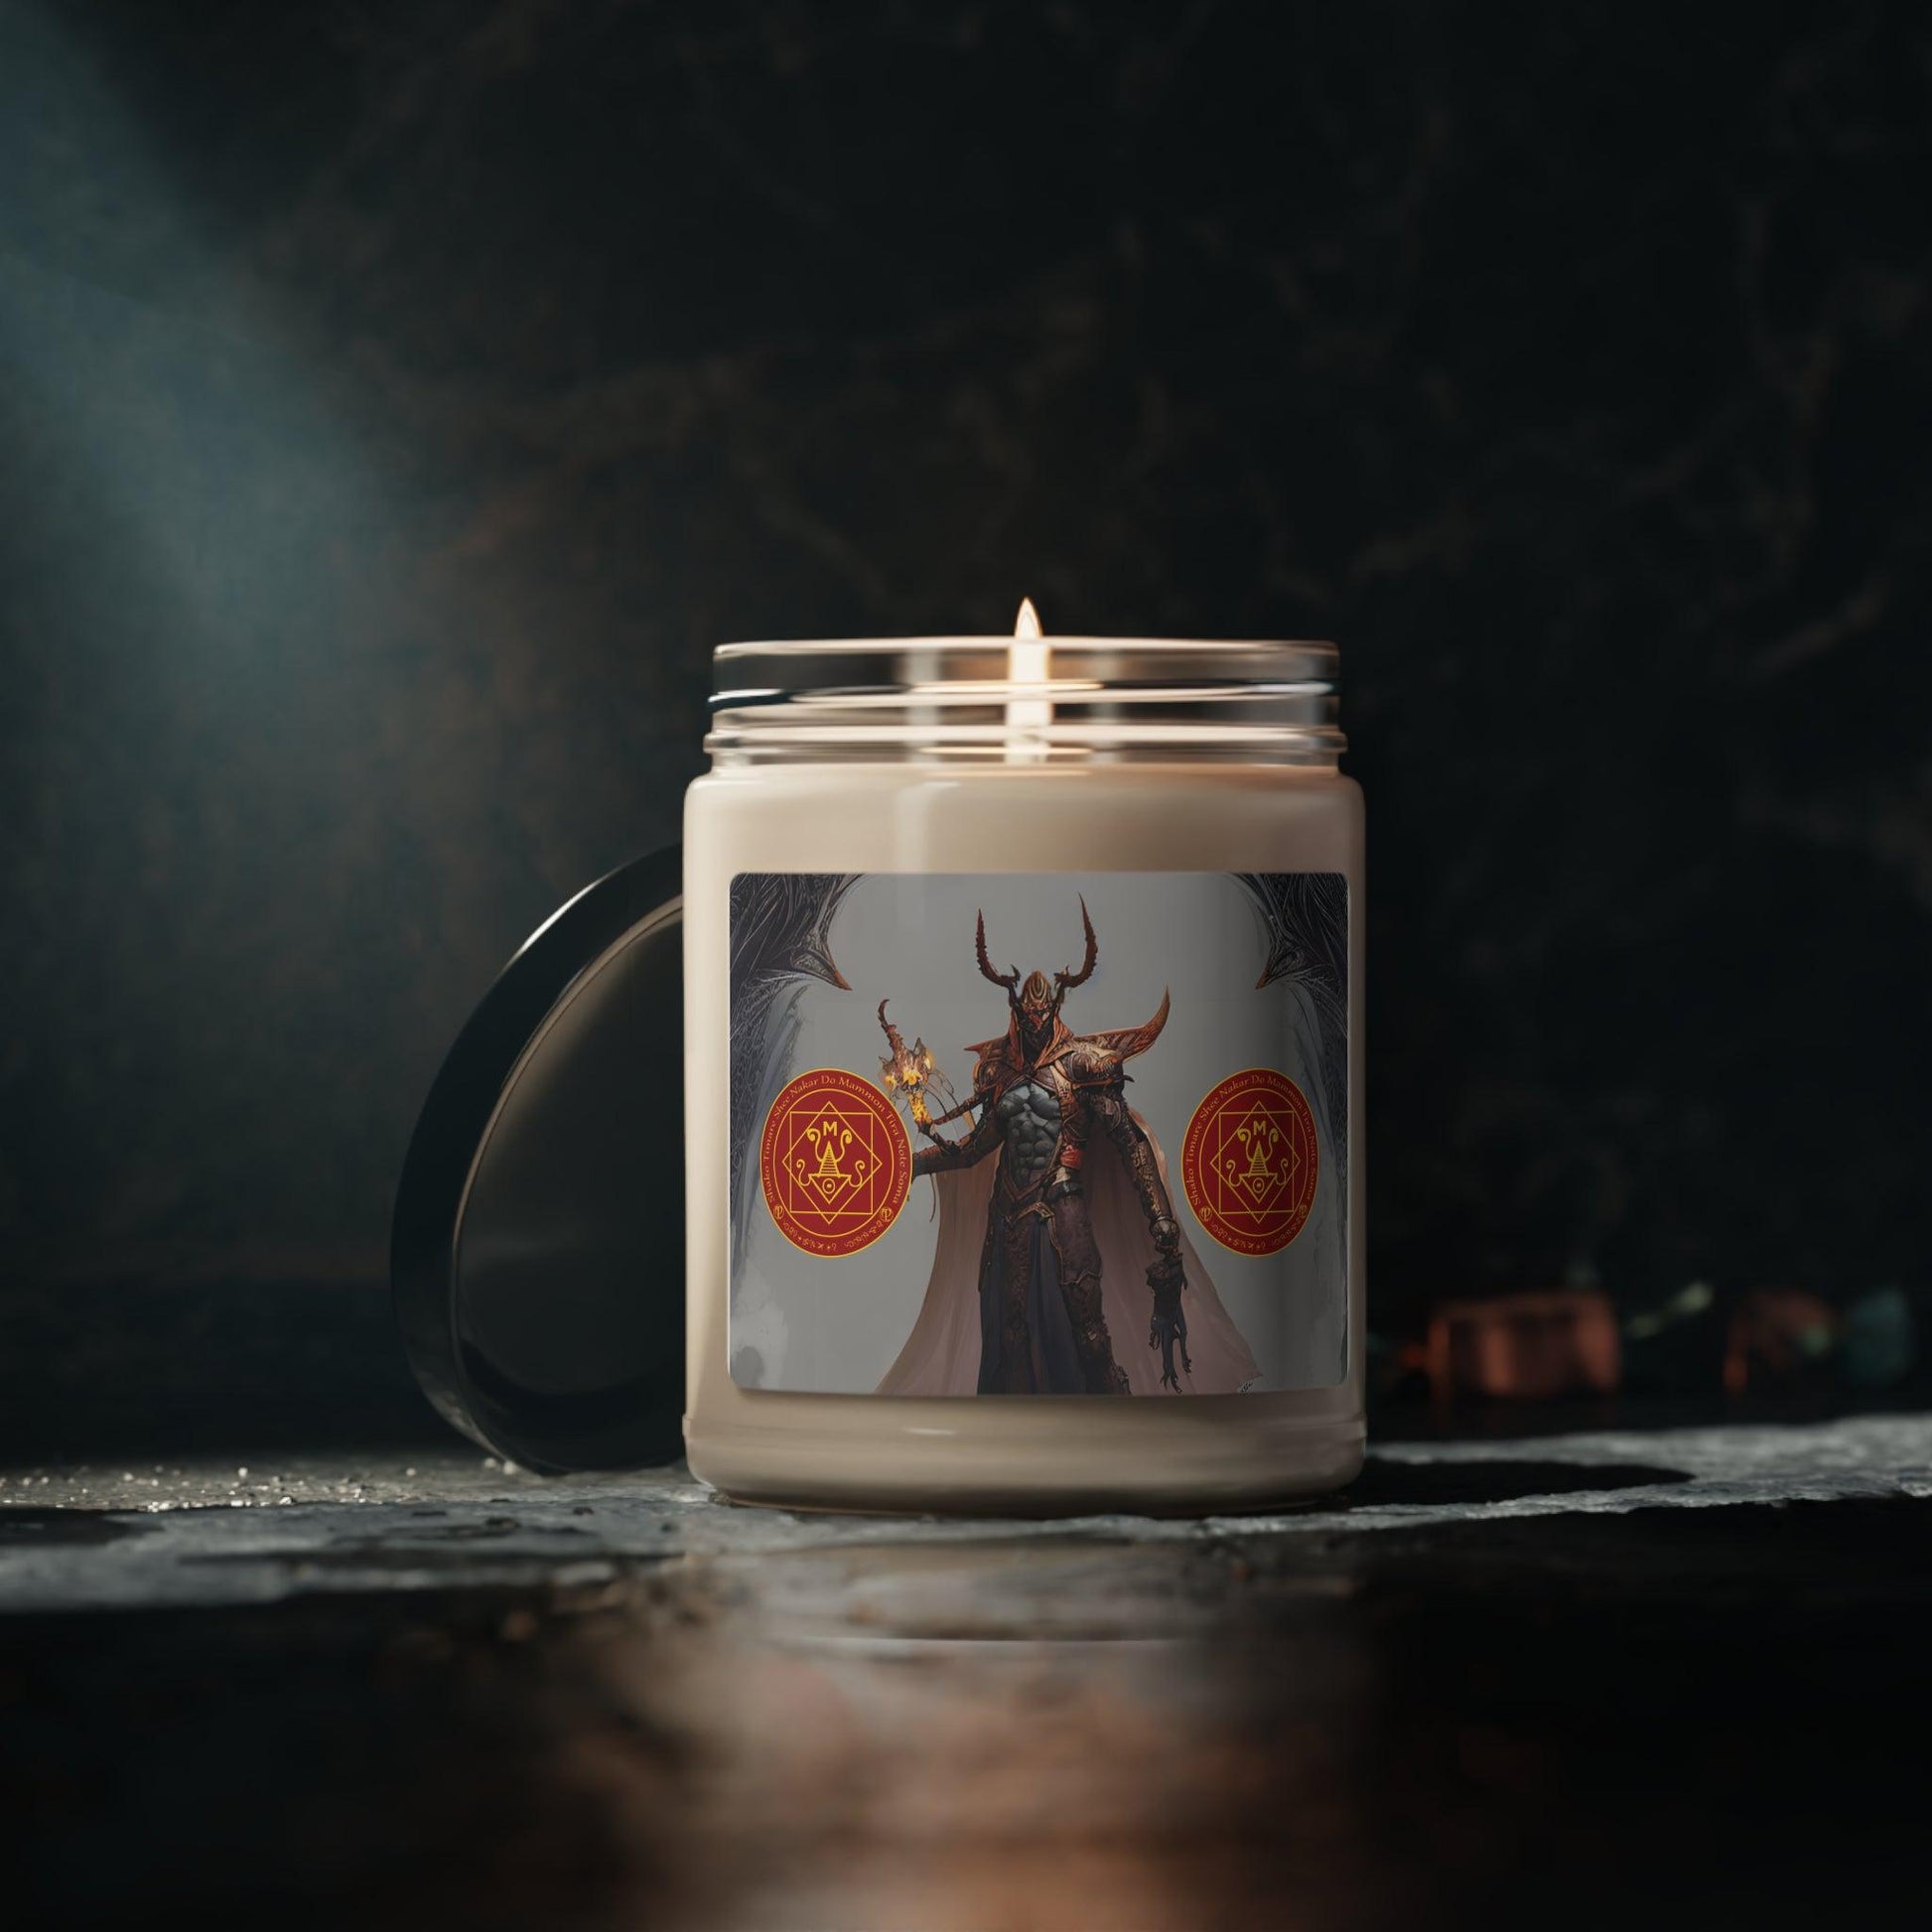 Demon-Mammon-Altar-Scented-Soy-Candle-for-Money-related-offerings-rituals-initiations-or-praying-and-meditation-15